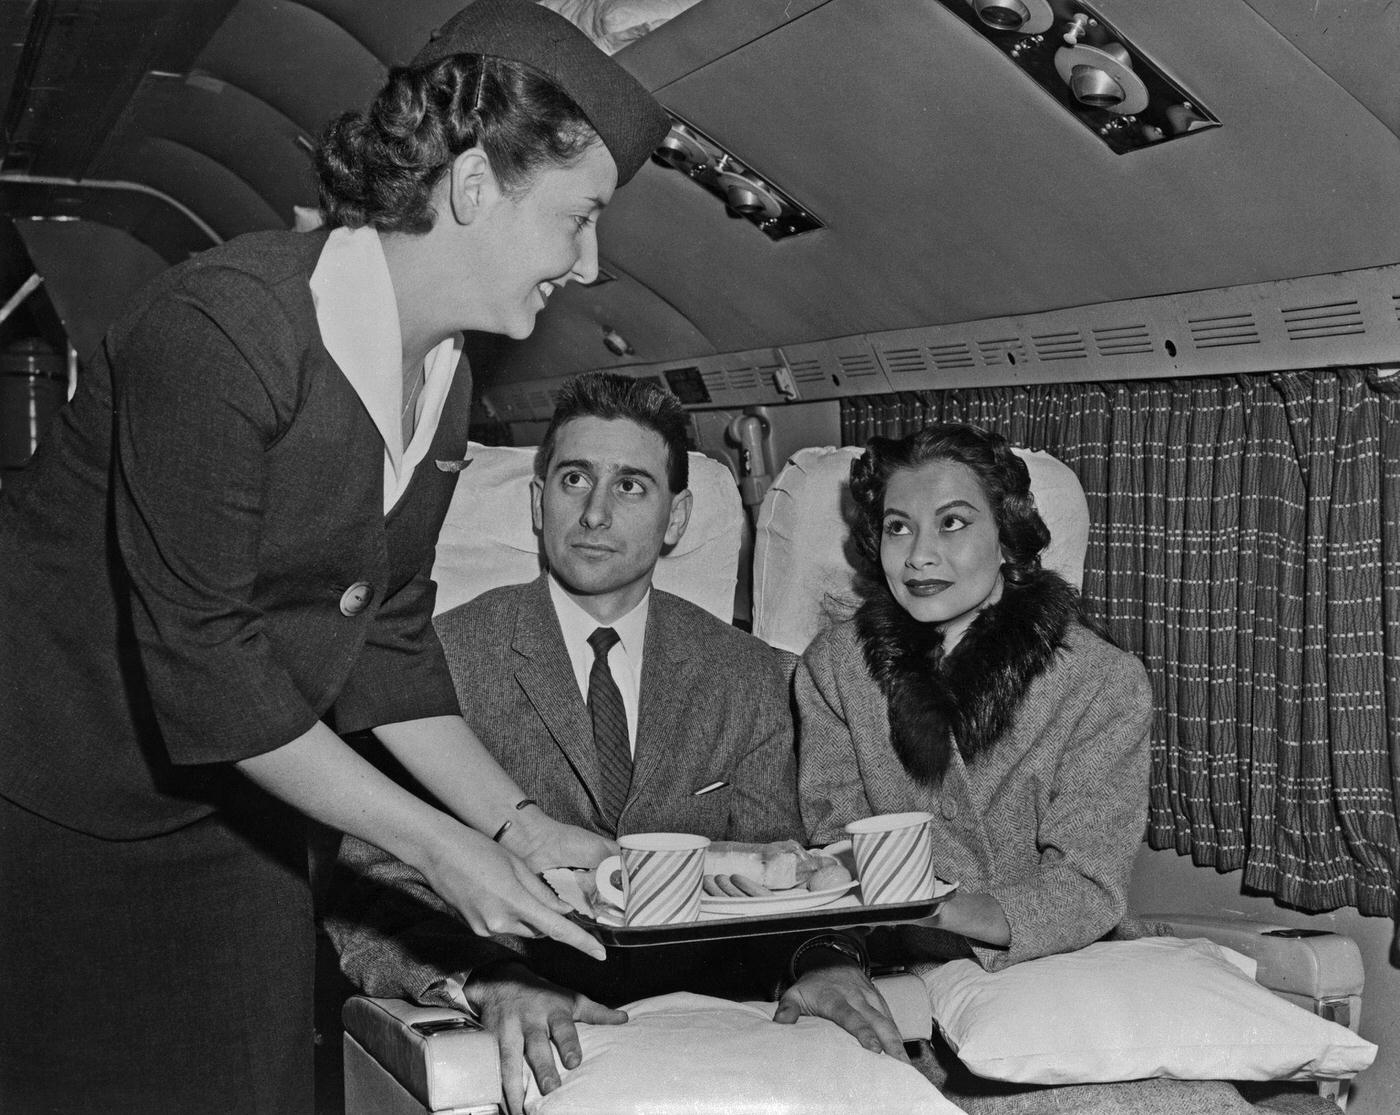 In the mid-1950s, an air hostess serves a snack to passengers on a Transocean Air lines Boeing 377 Stratocruiser. Transocean Air lines was a pioneer discount airline that flew between 1946 and 1962.